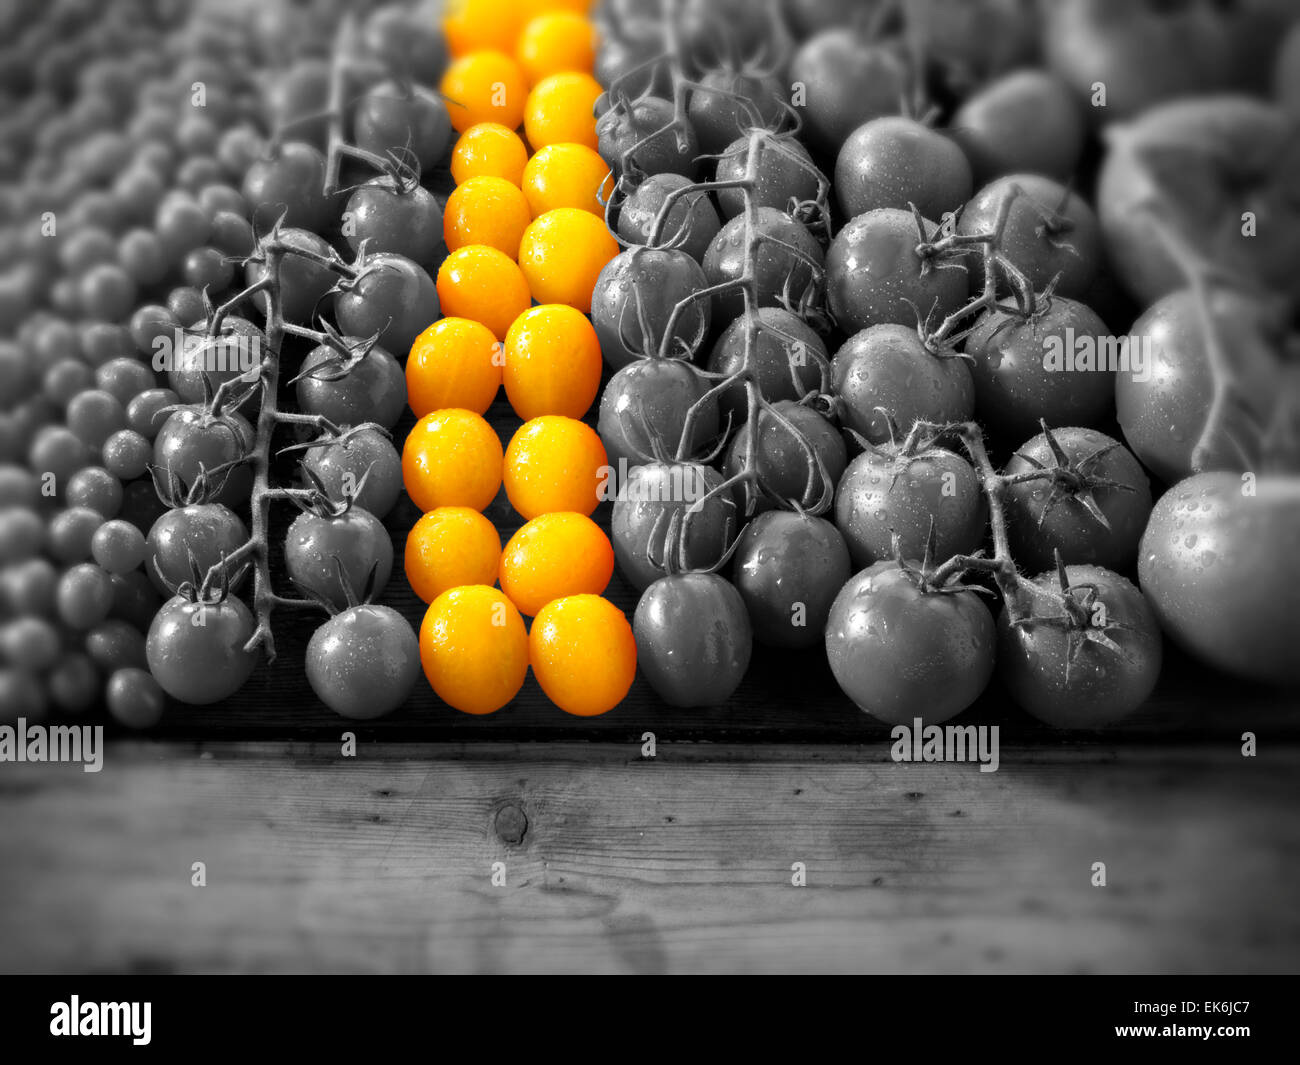 A row of yellow tomatoes amongst other mixed tomatoes in black and white ( selective color) Stock Photo